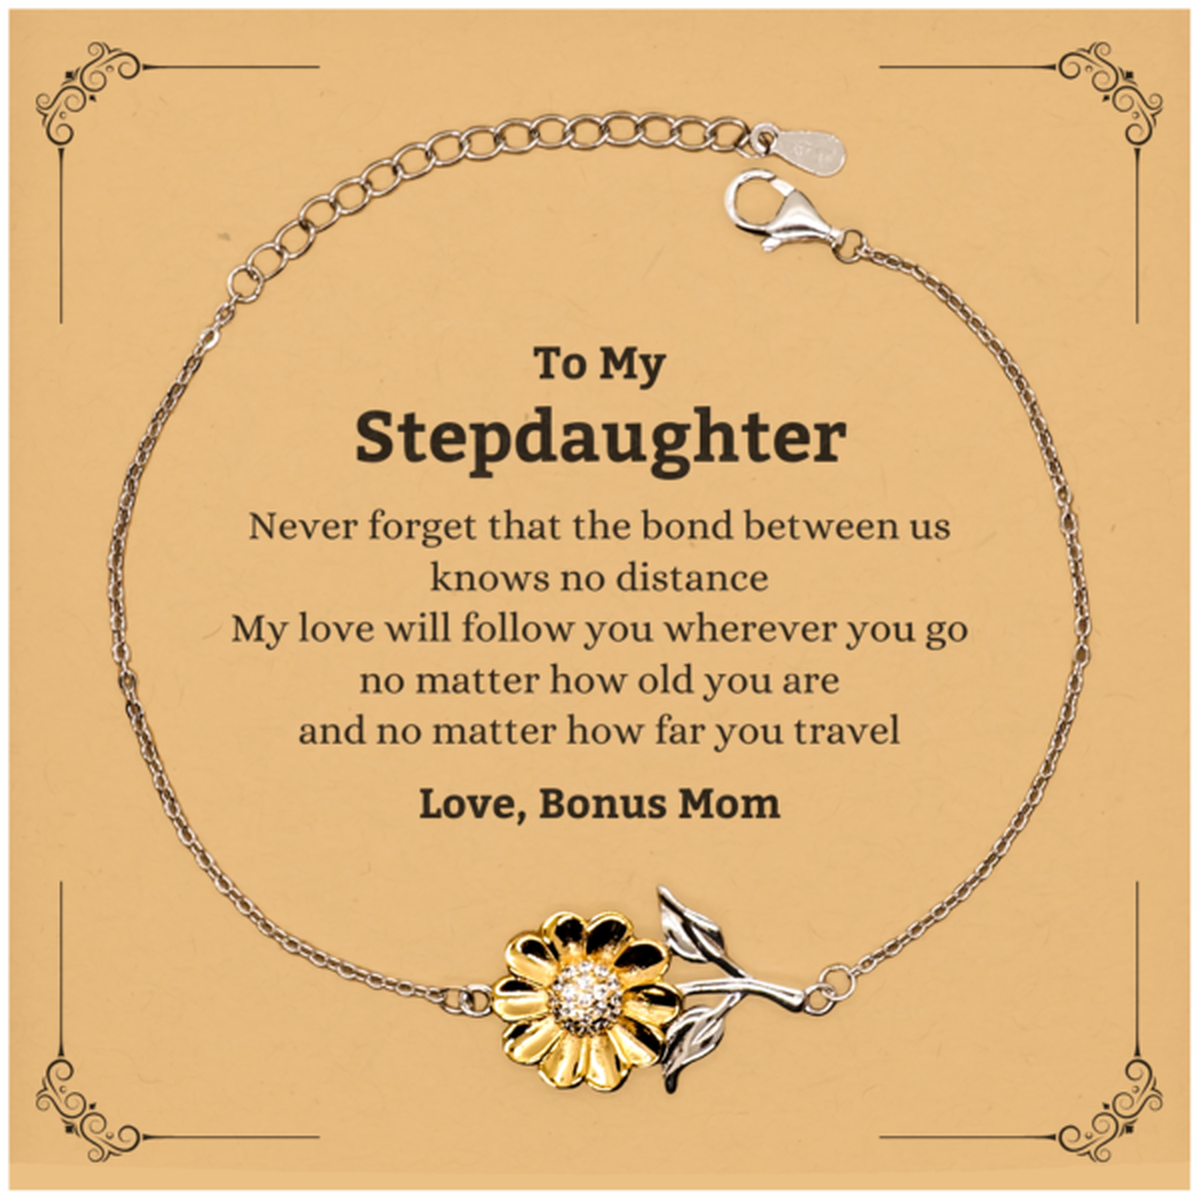 Stepdaughter Birthday Gifts from Bonus Mom, Adjustable Sunflower Bracelet for Stepdaughter Christmas Graduation Unique Gifts Stepdaughter Never forget that the bond between us knows no distance. Love, Bonus Mom